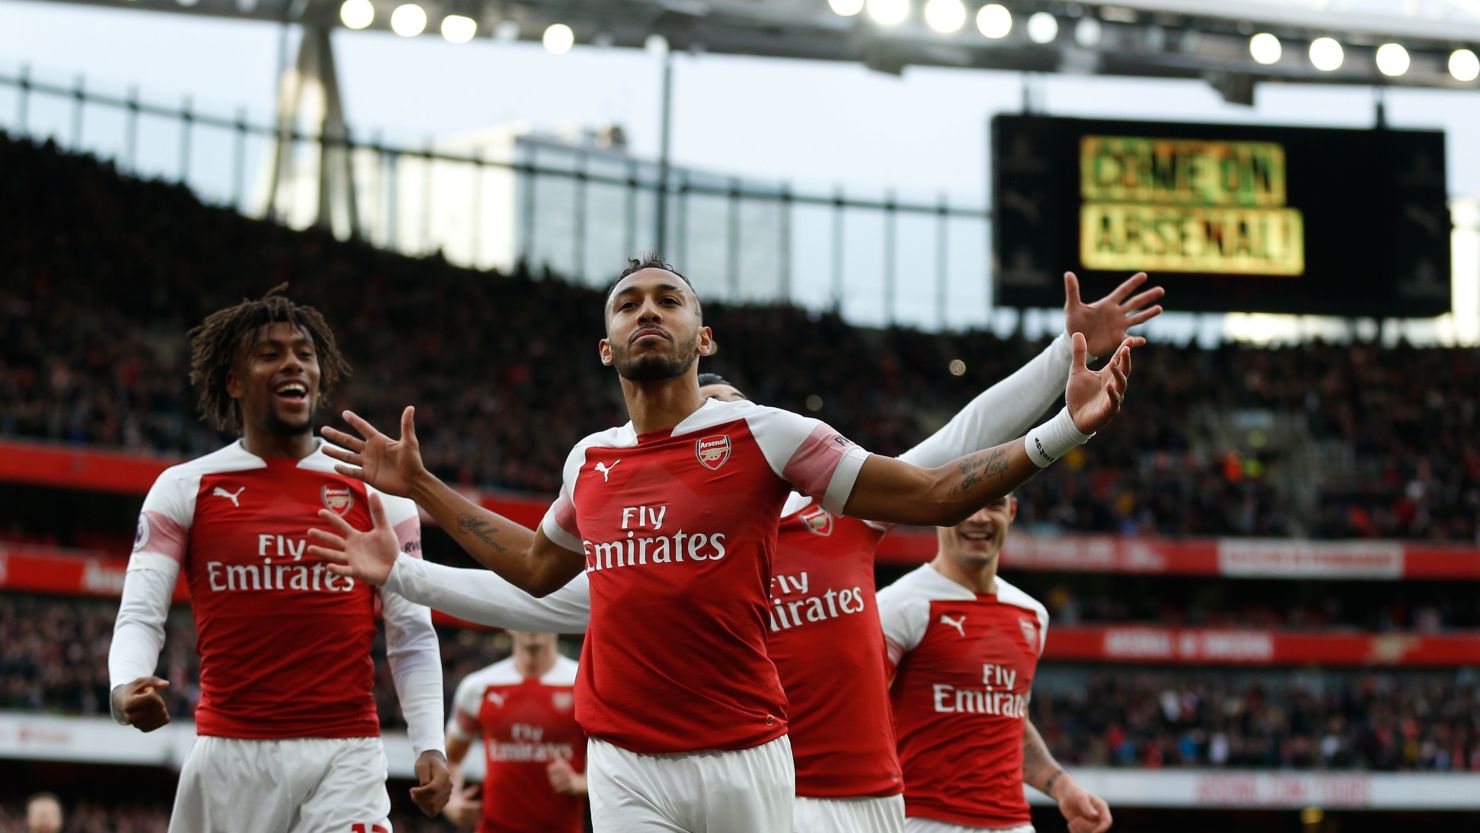 Arsenal's Pierre-Emerick Aubameyang celebrates after scoring the opening goal from the penalty spot during Arsenal's EPL encounter with Tottenham Hotspur at the Emirates Stadium.